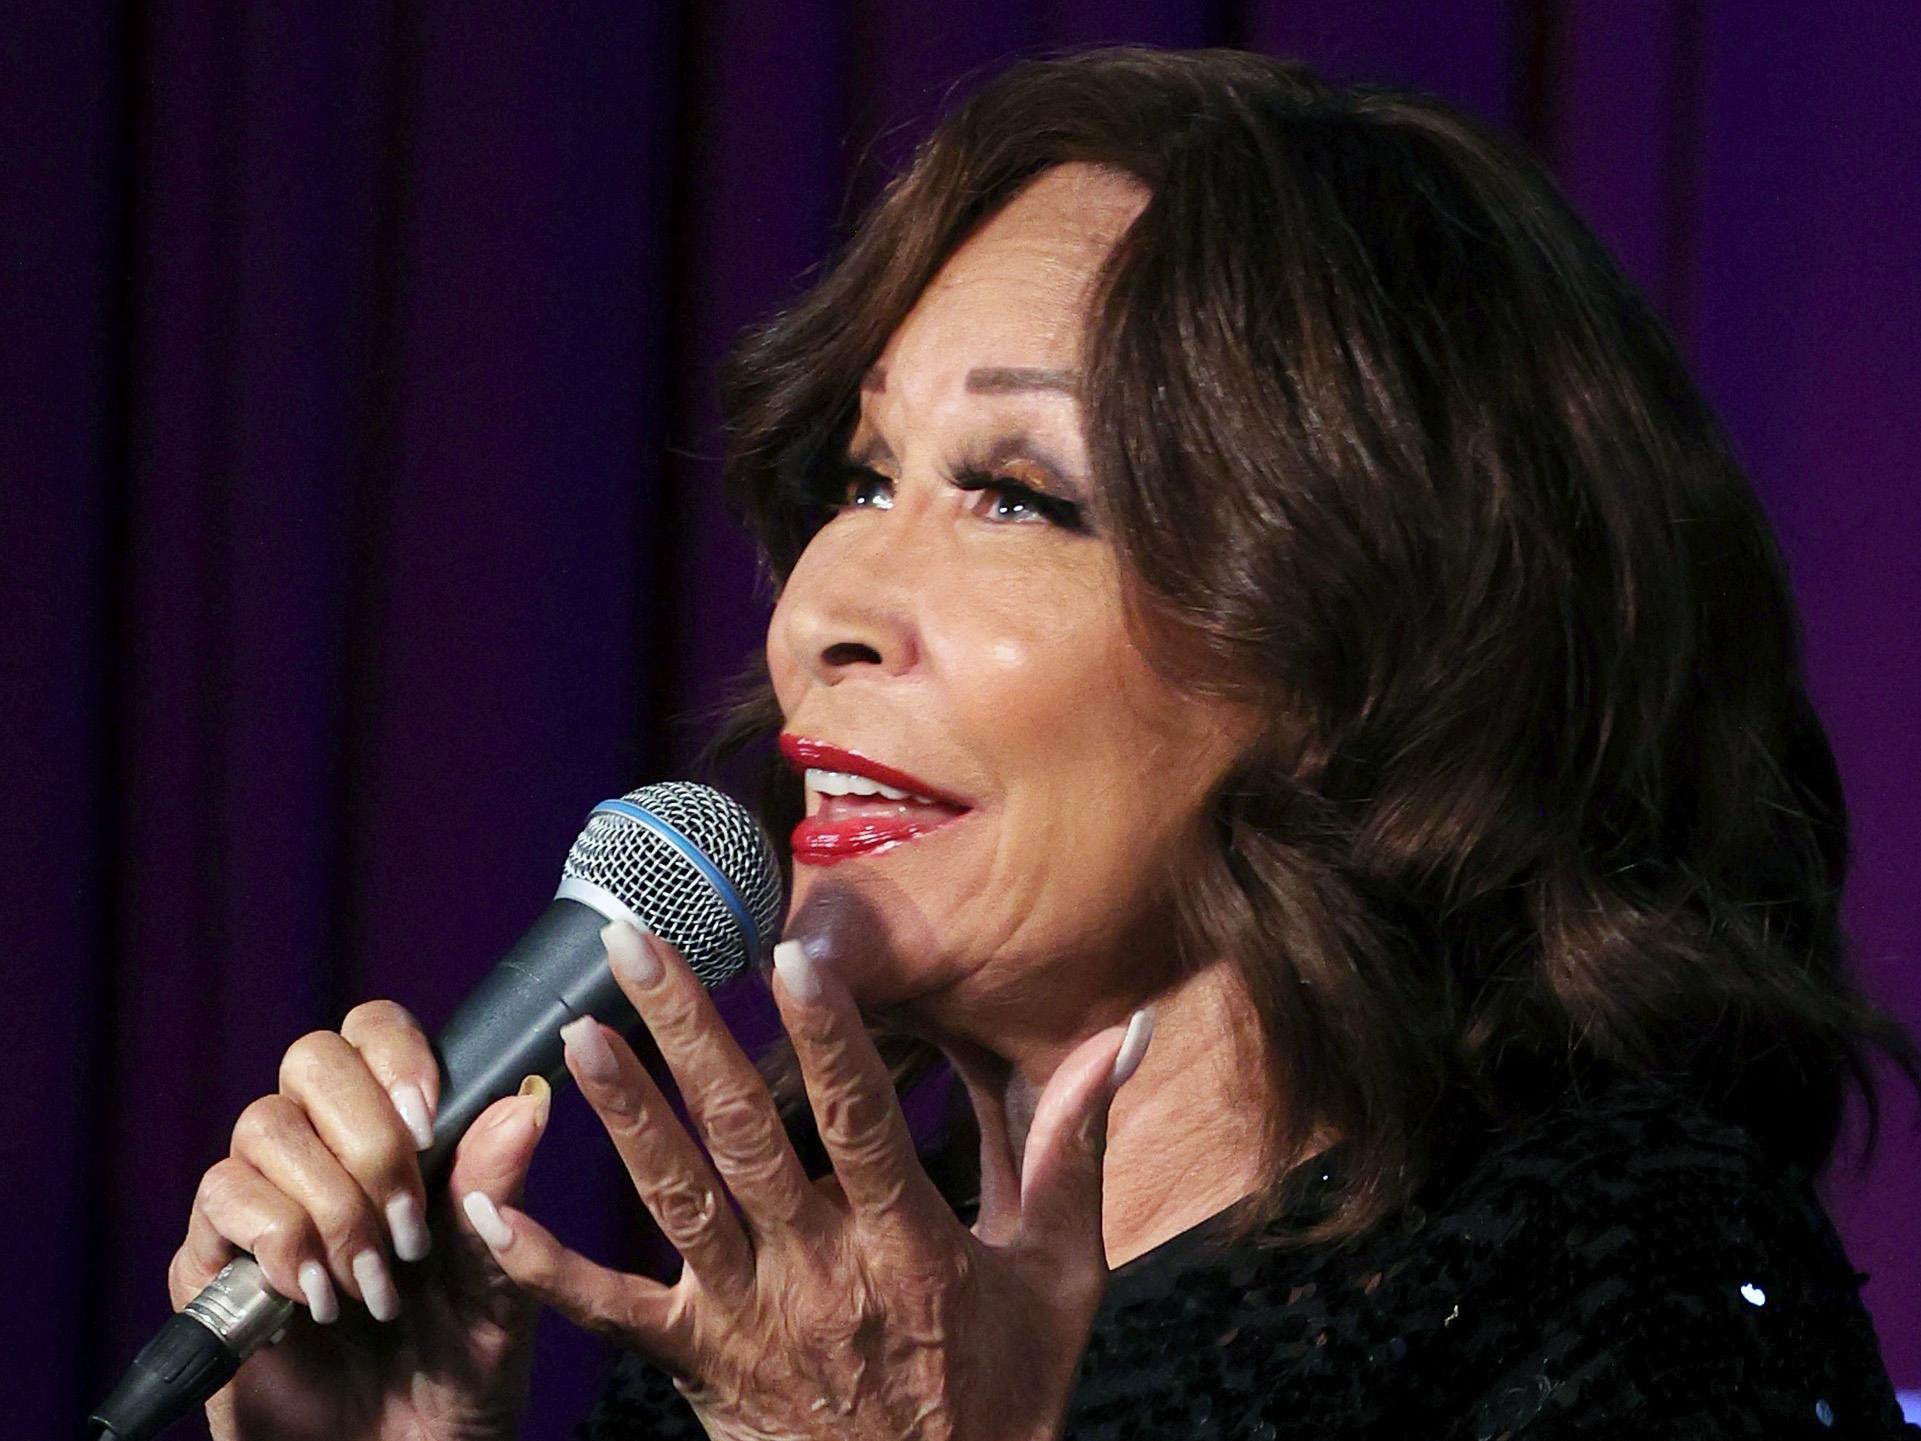 15 Captivating Facts About Freda Payne - Facts.net